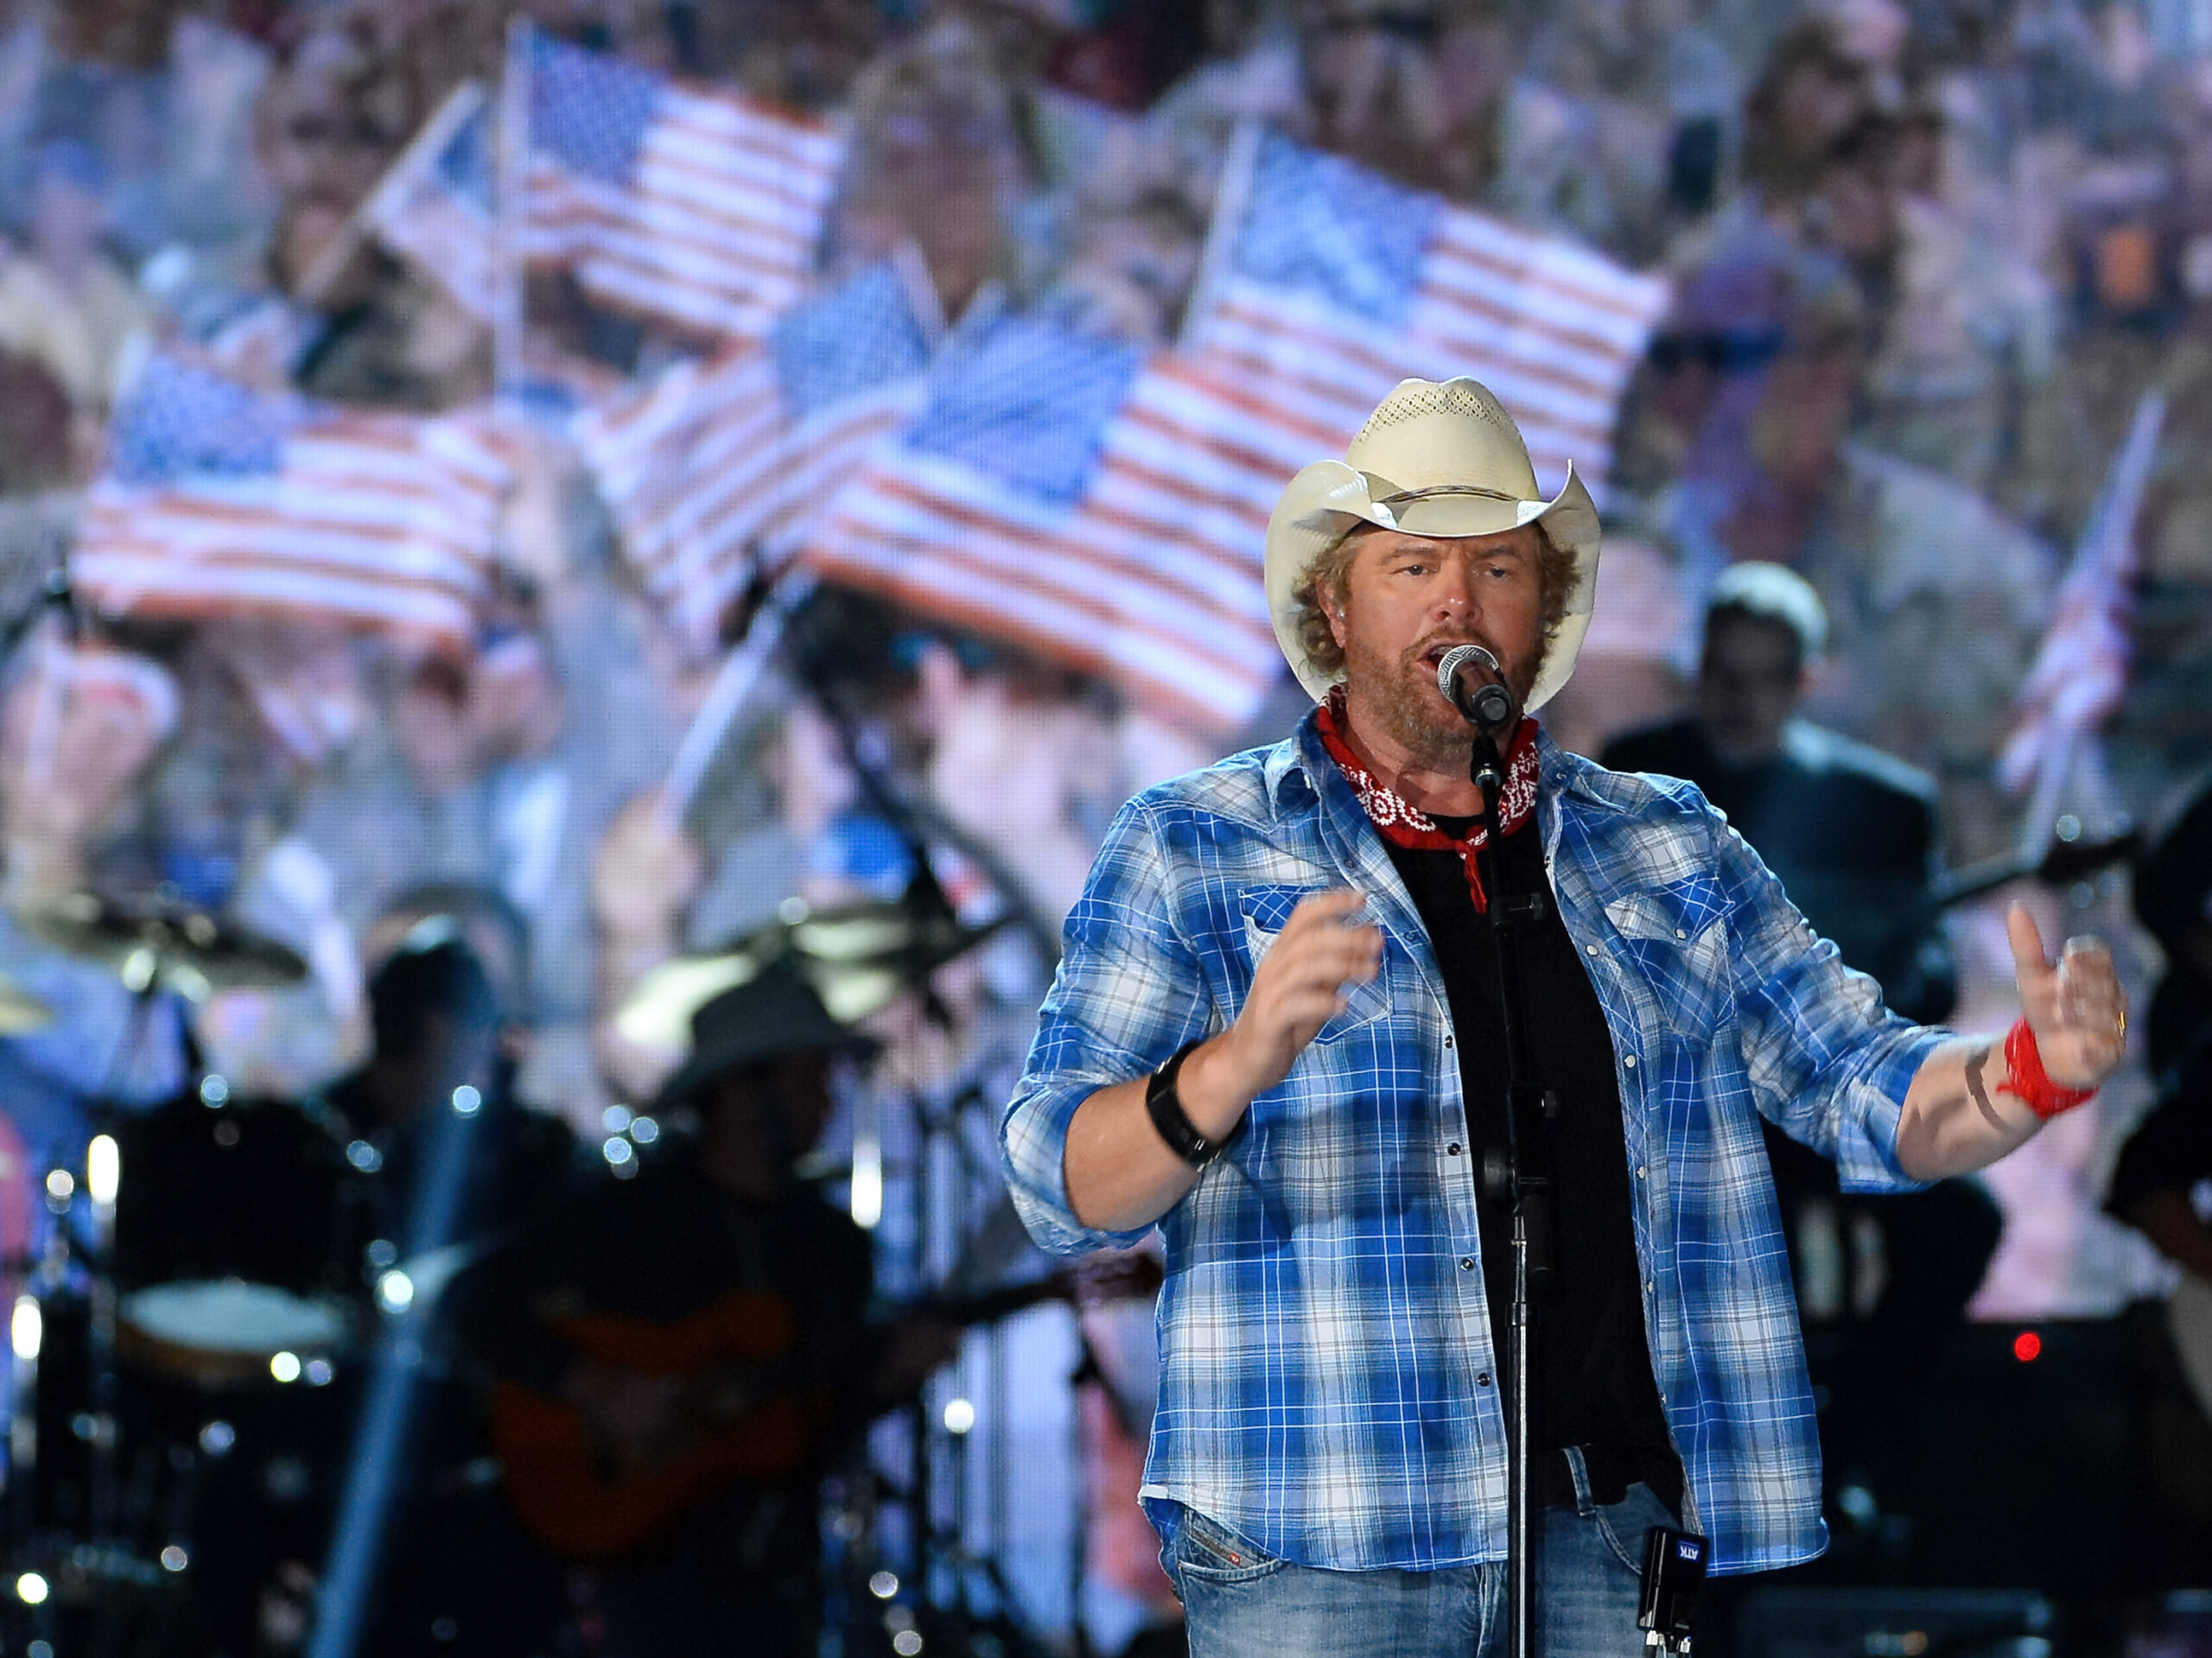 Toby Keith’s ‘Courtesy of the Red, White and Blue’ lives on in MAGA country